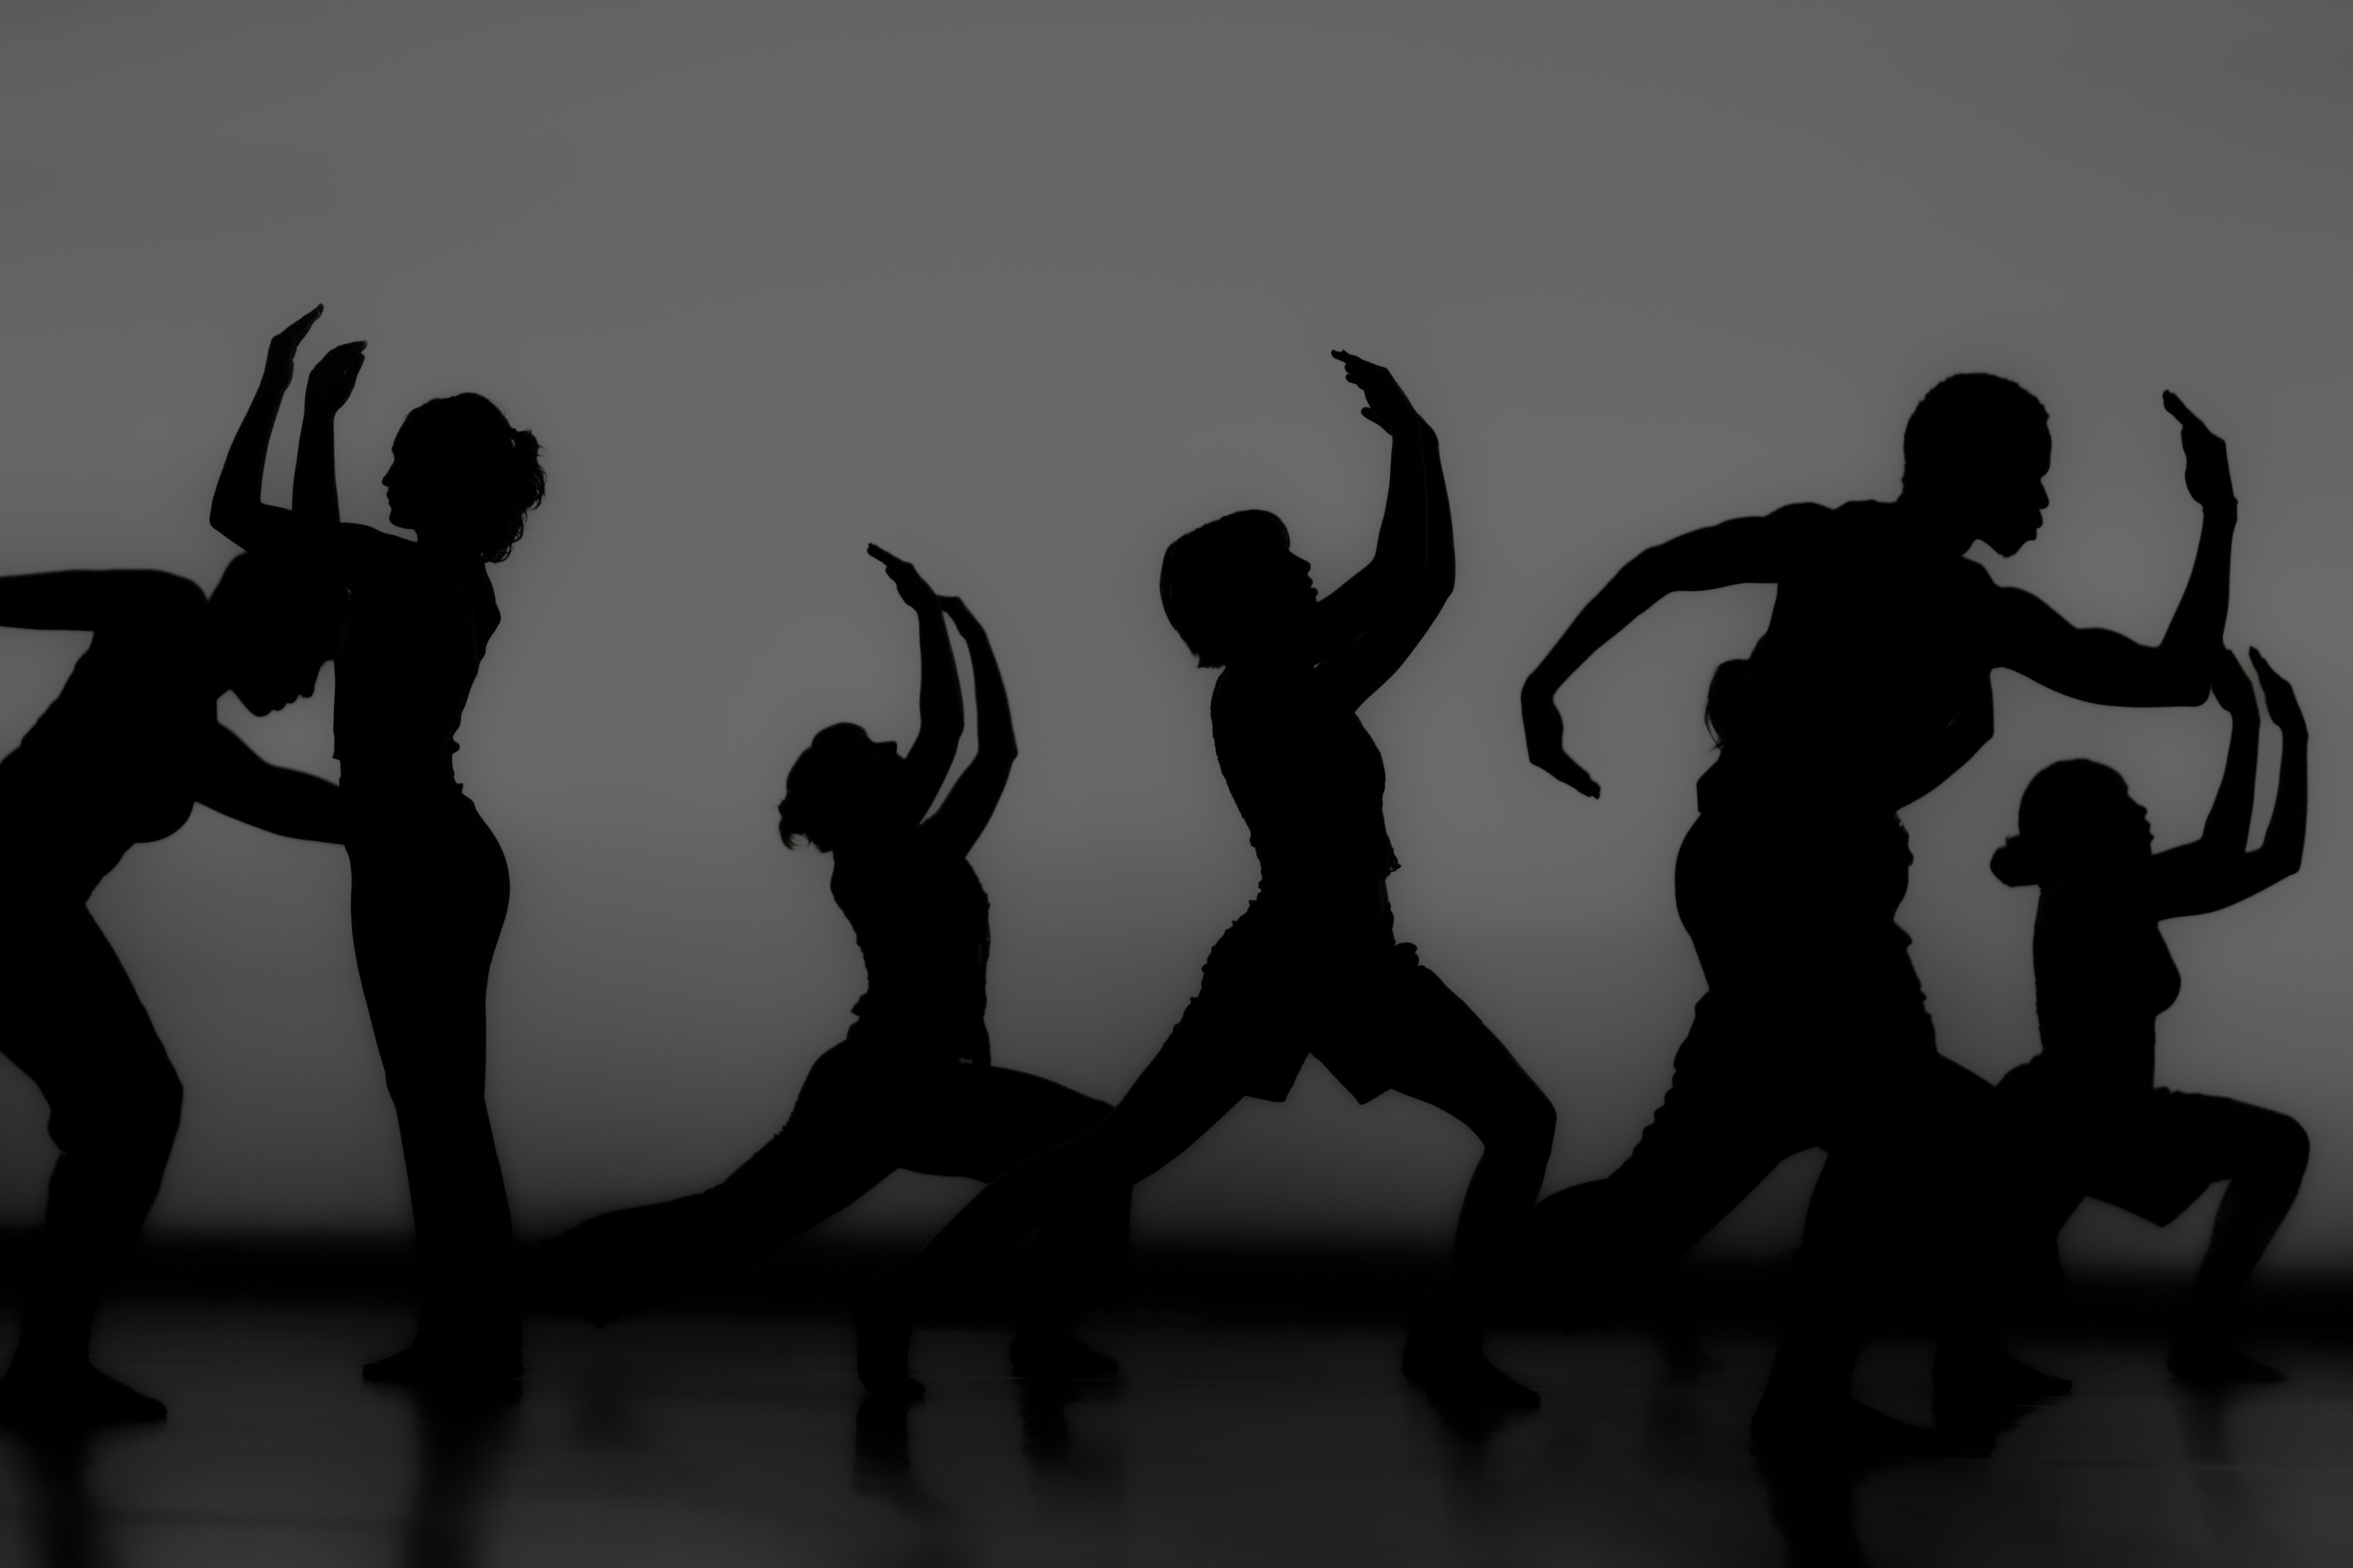 Black outline/shadows of students dancing against a grey background.